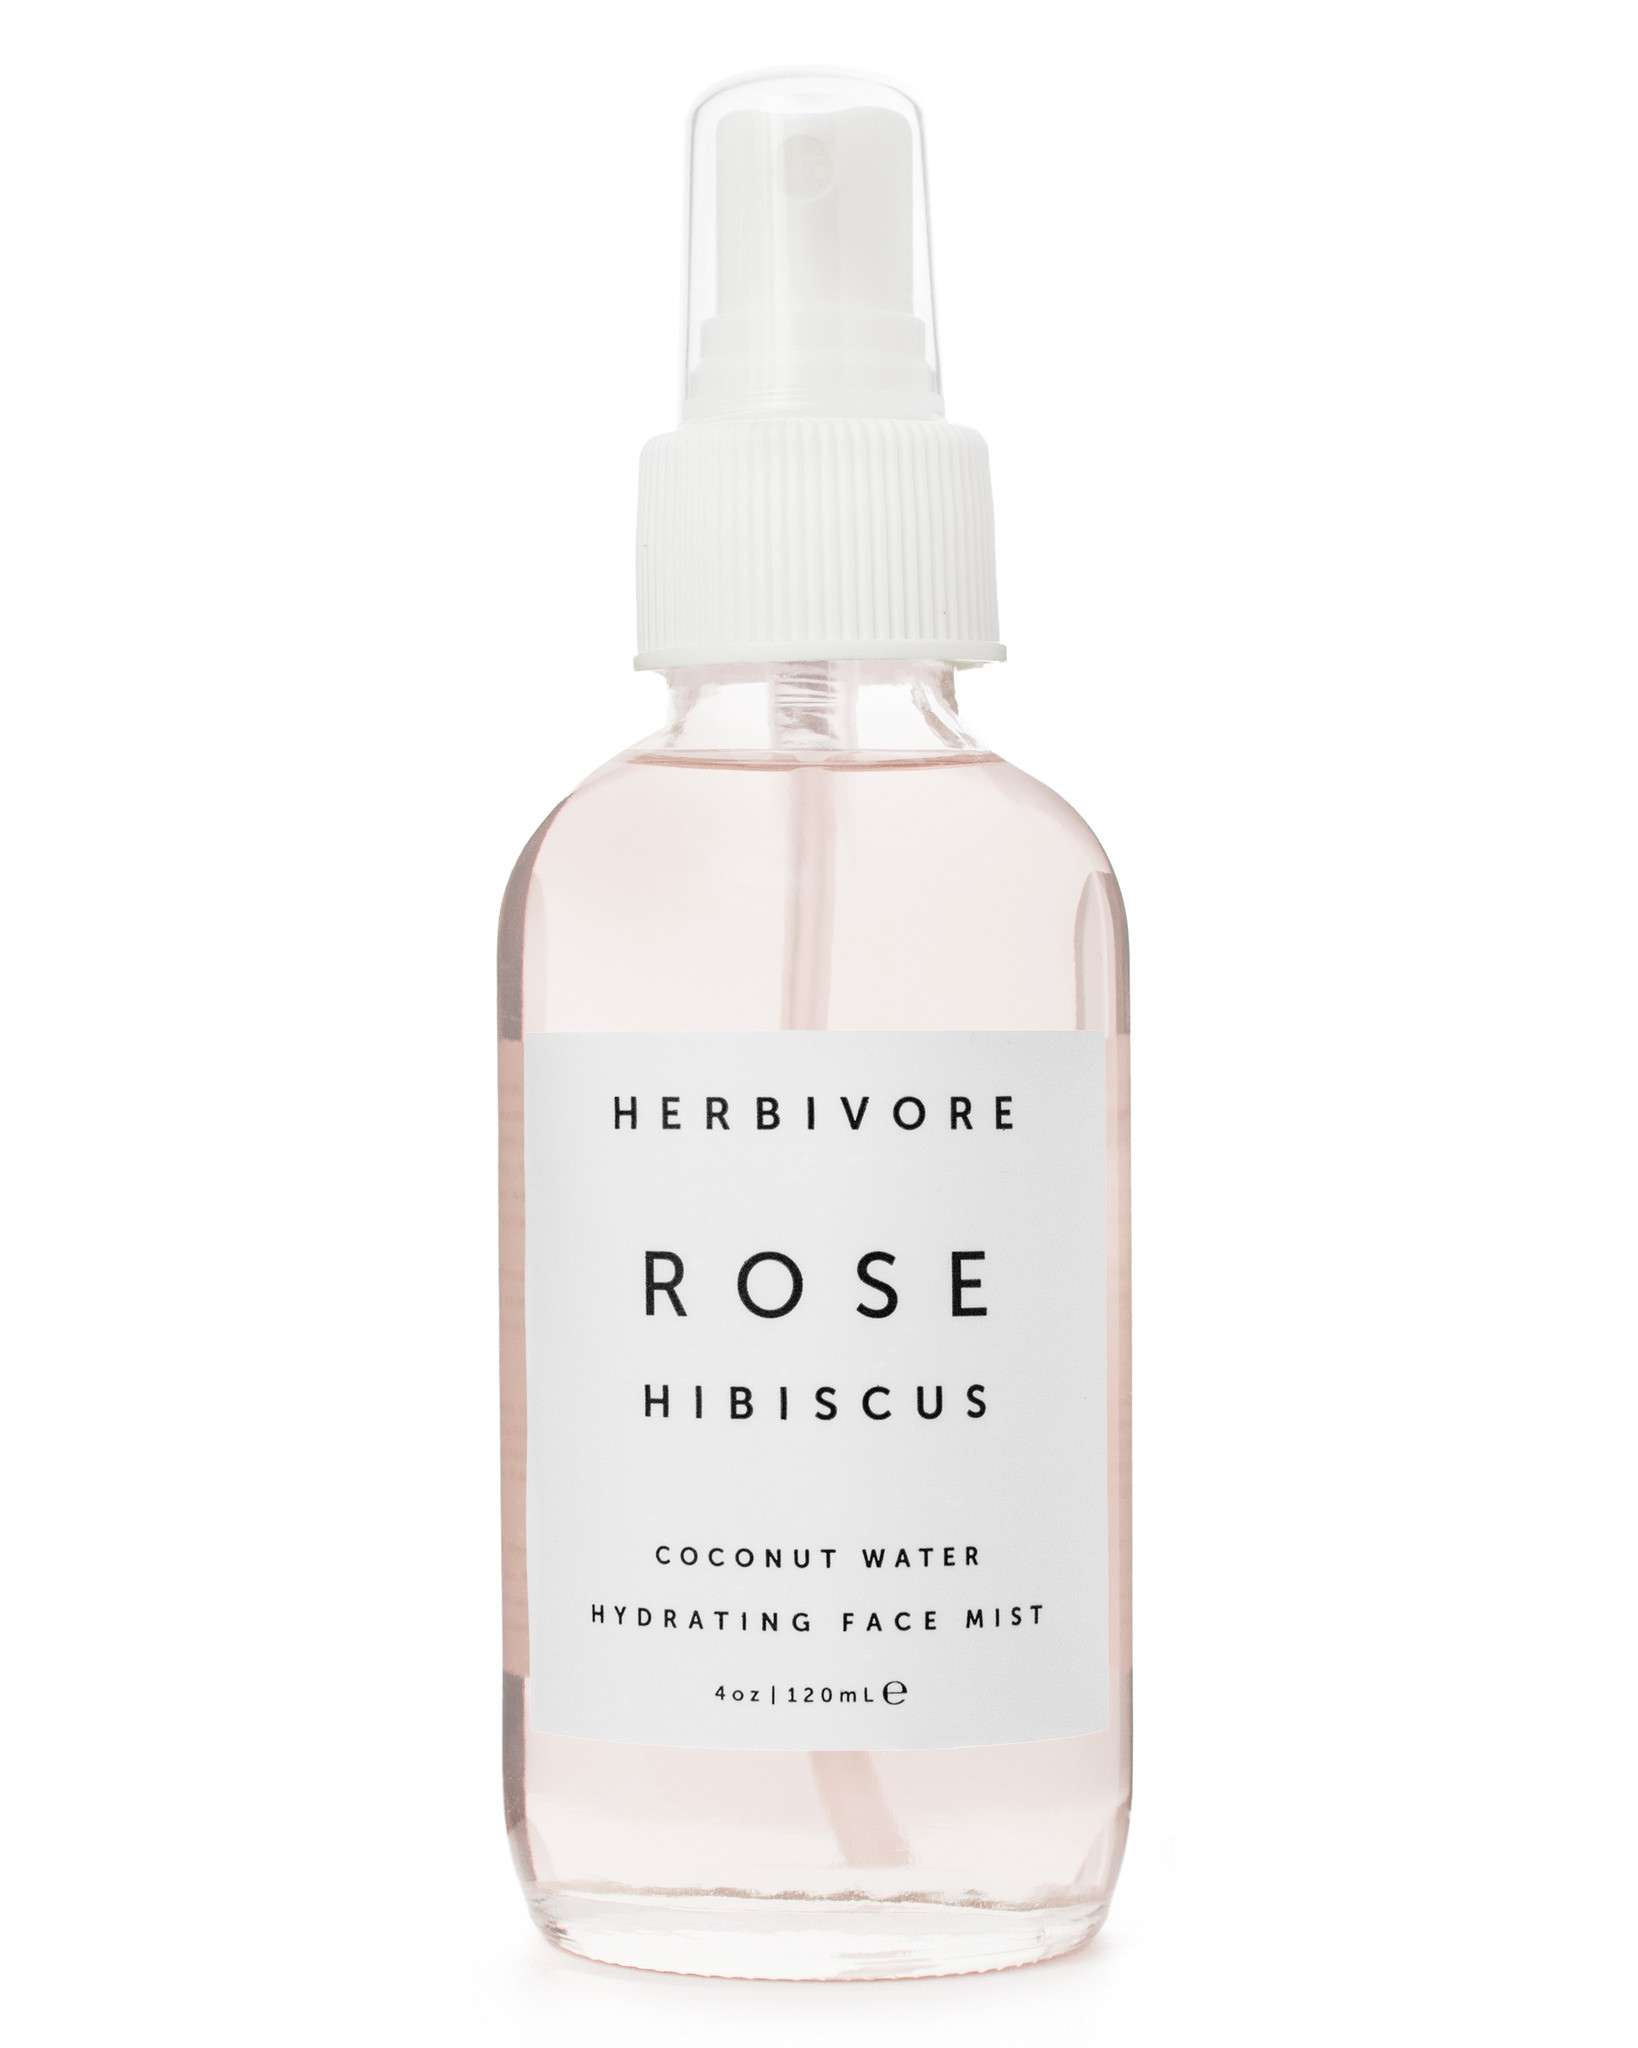 Pearlessence Rose Water Hydrating Face Mist - Reviews